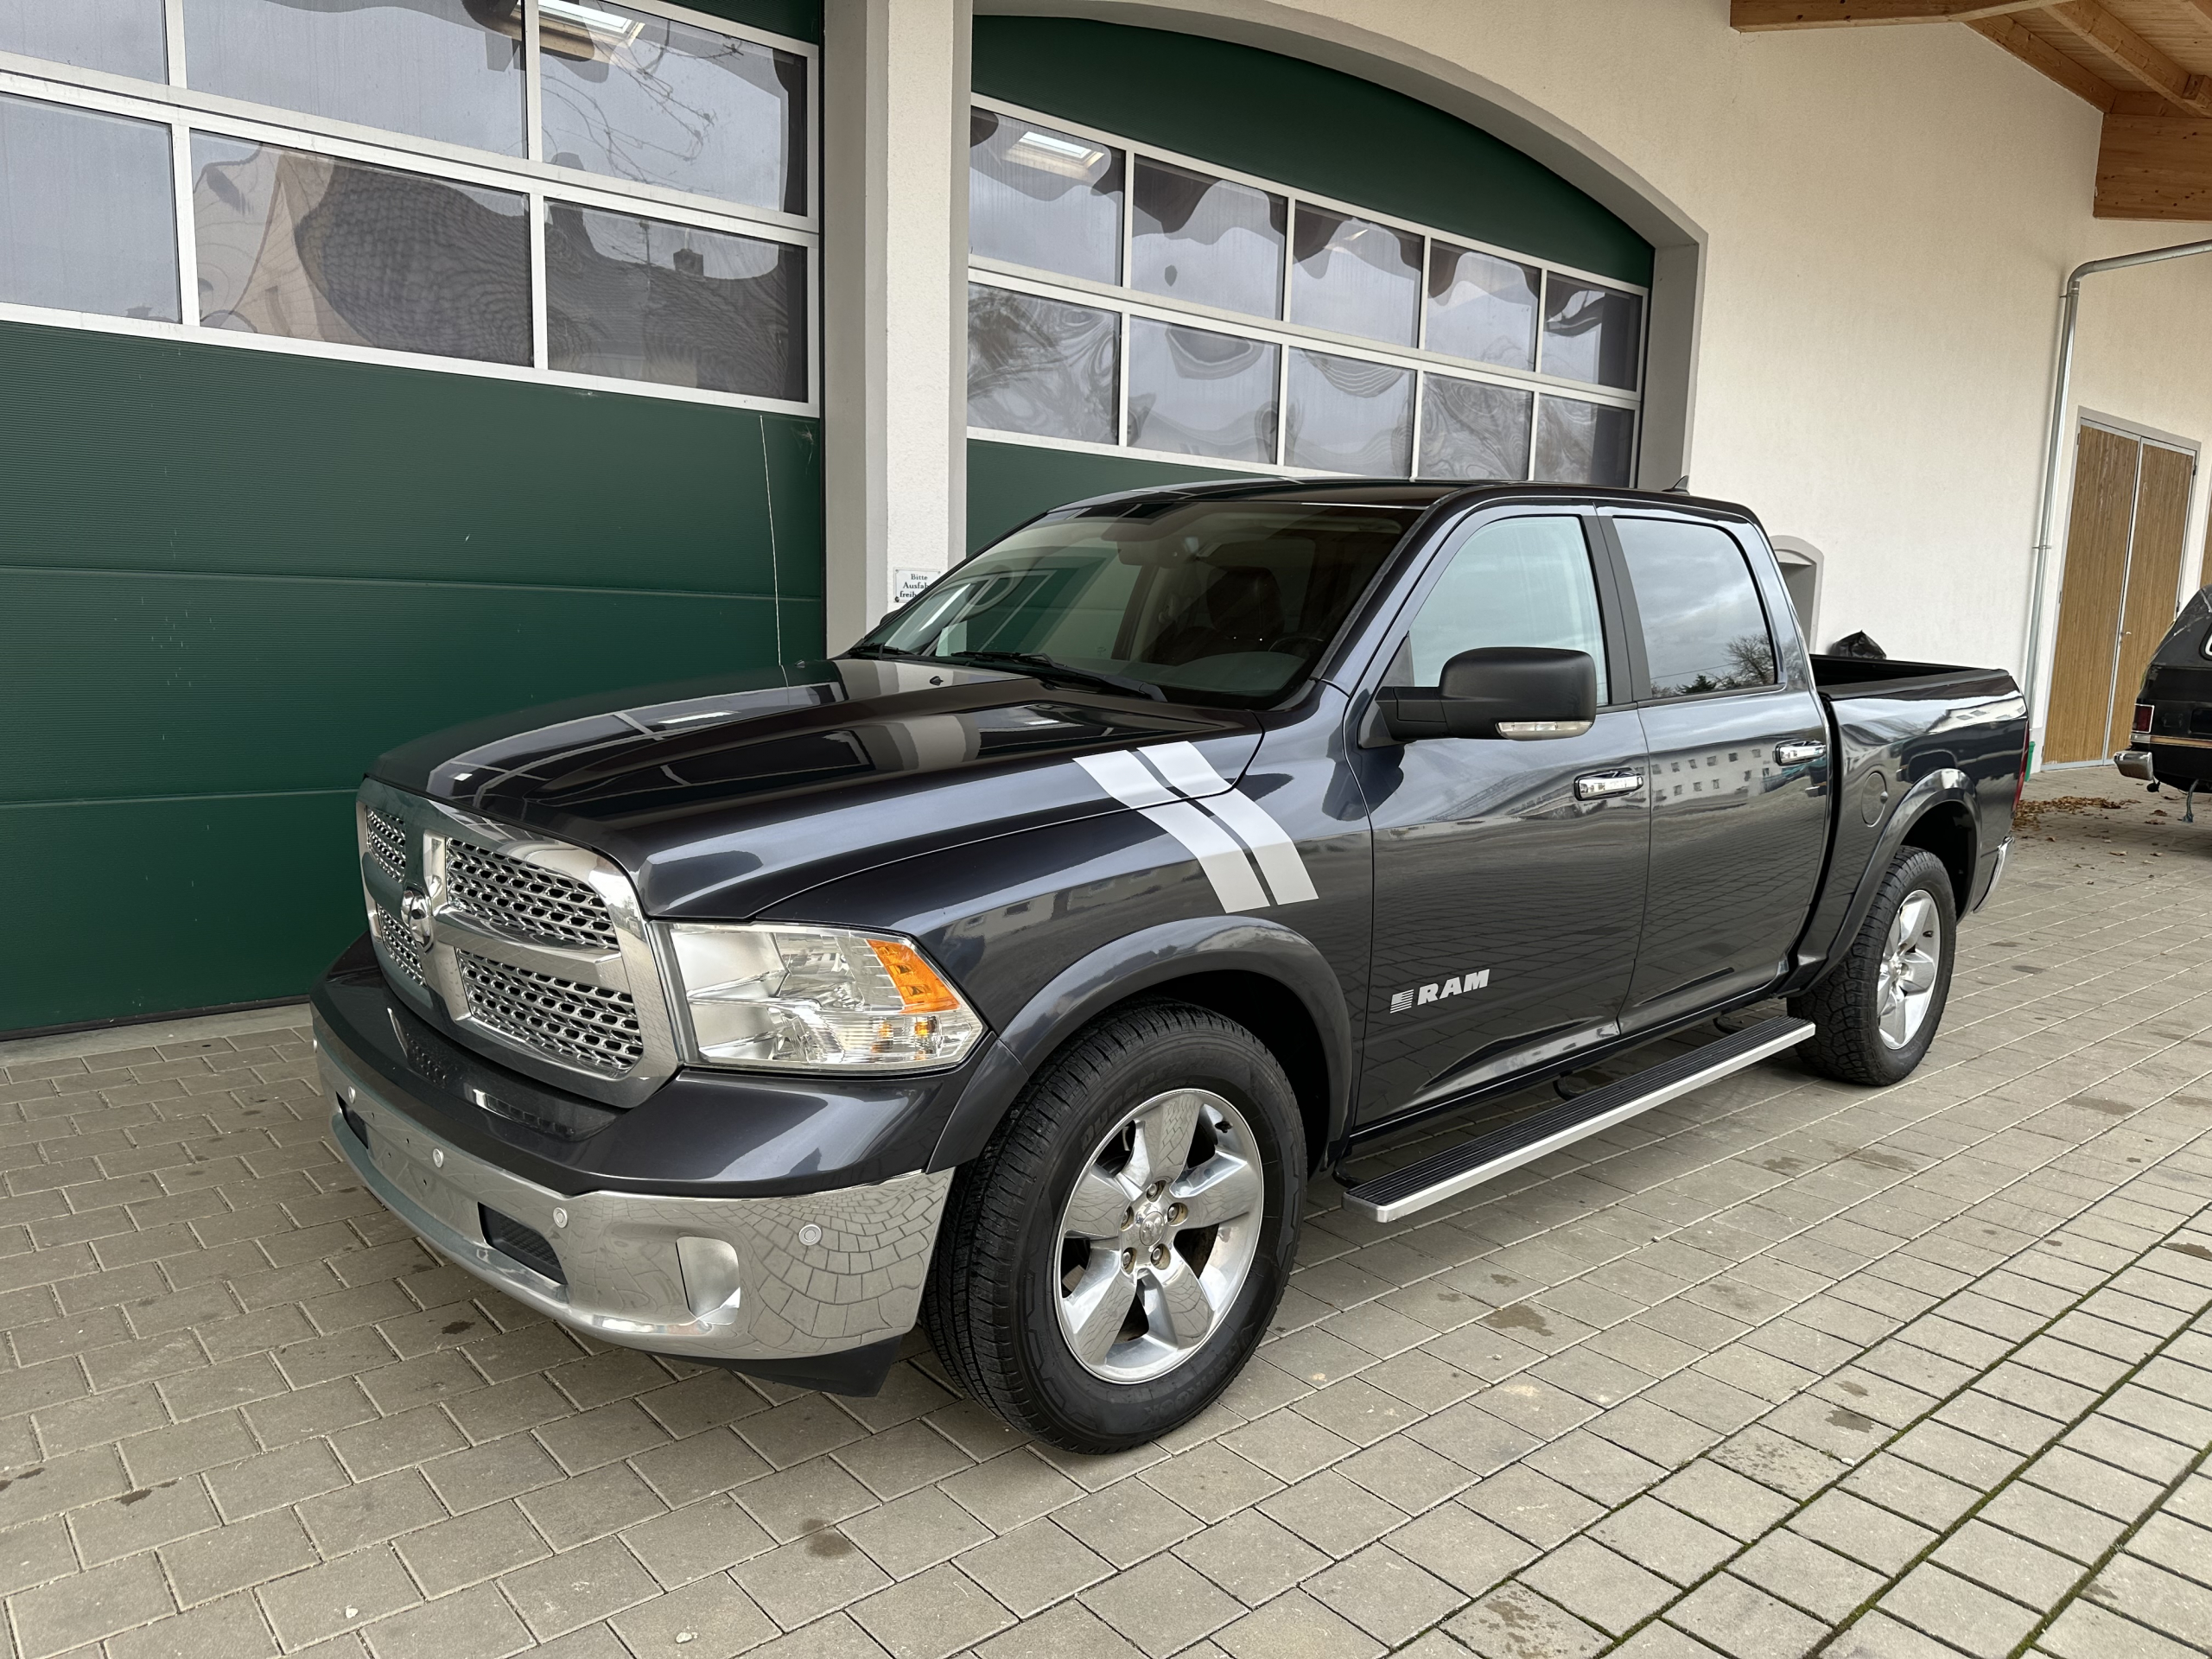 2017 dodge ram 1500 Big Horn for sale Luxembourg City, Luxembourg